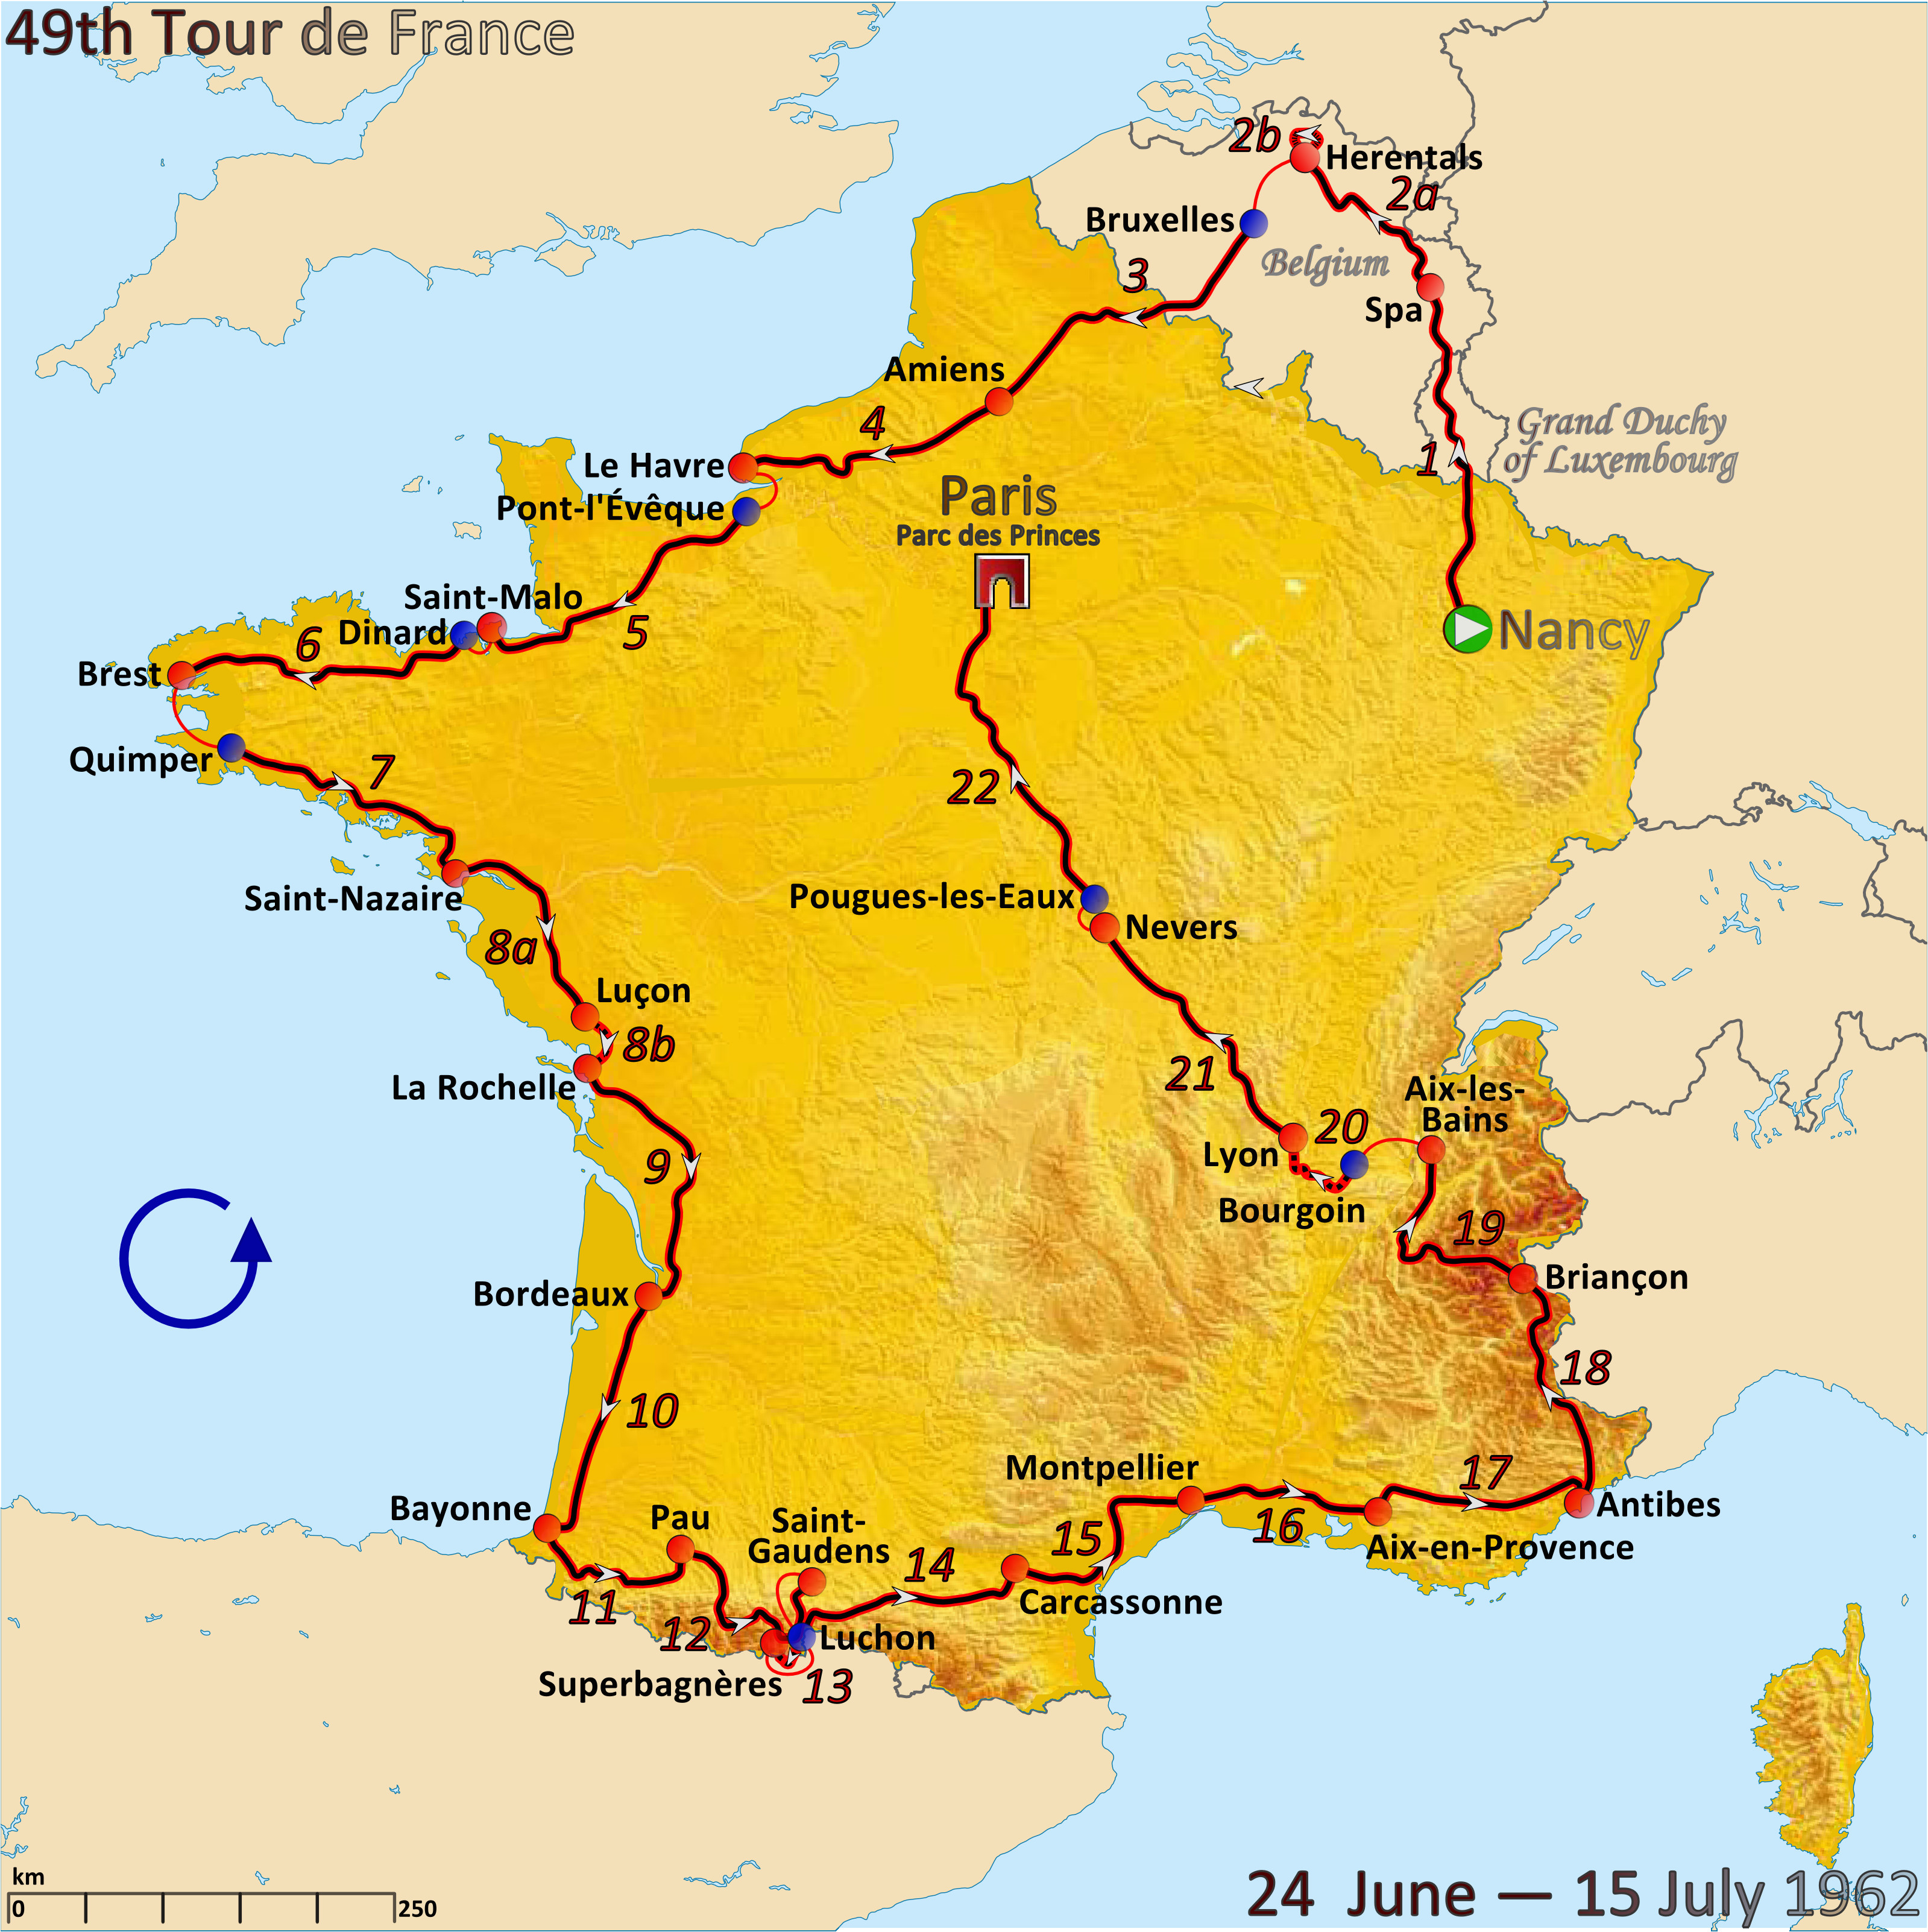 first stage of tour de france route